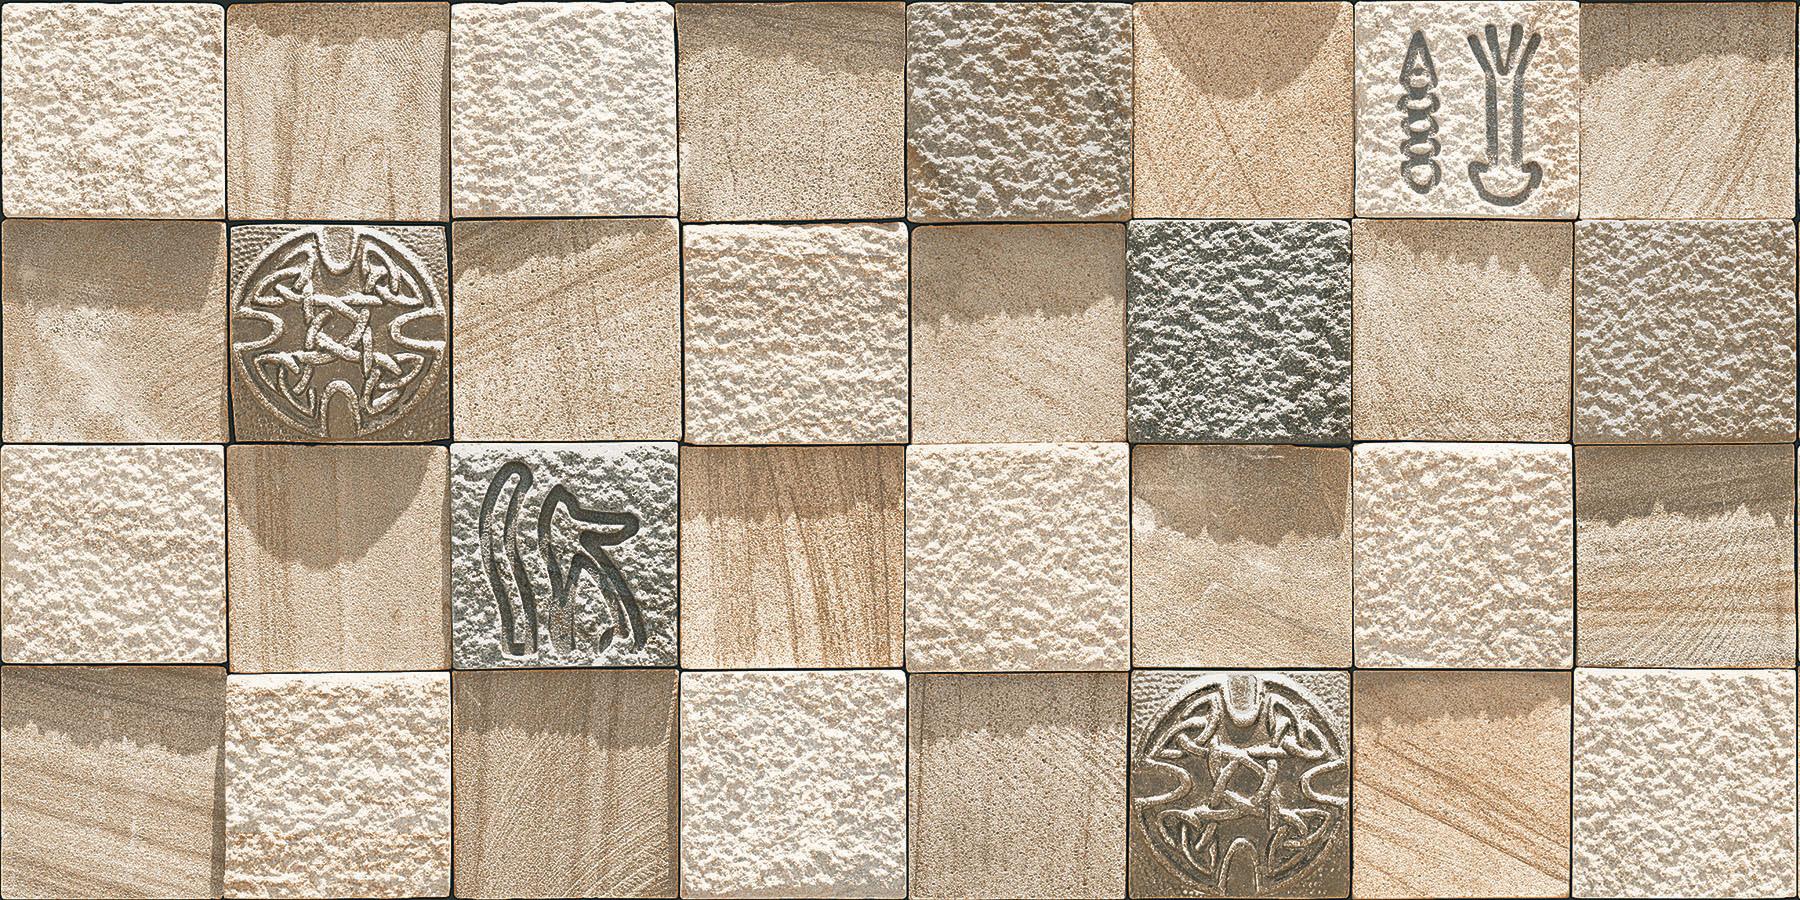 Elevation Tiles for Bathroom Tiles, Living Room Tiles, Elevation Tiles, Accent Tiles, Hospital Tiles, Bar/Restaurant, Commercial/Office, Outdoor Area, School & Collages